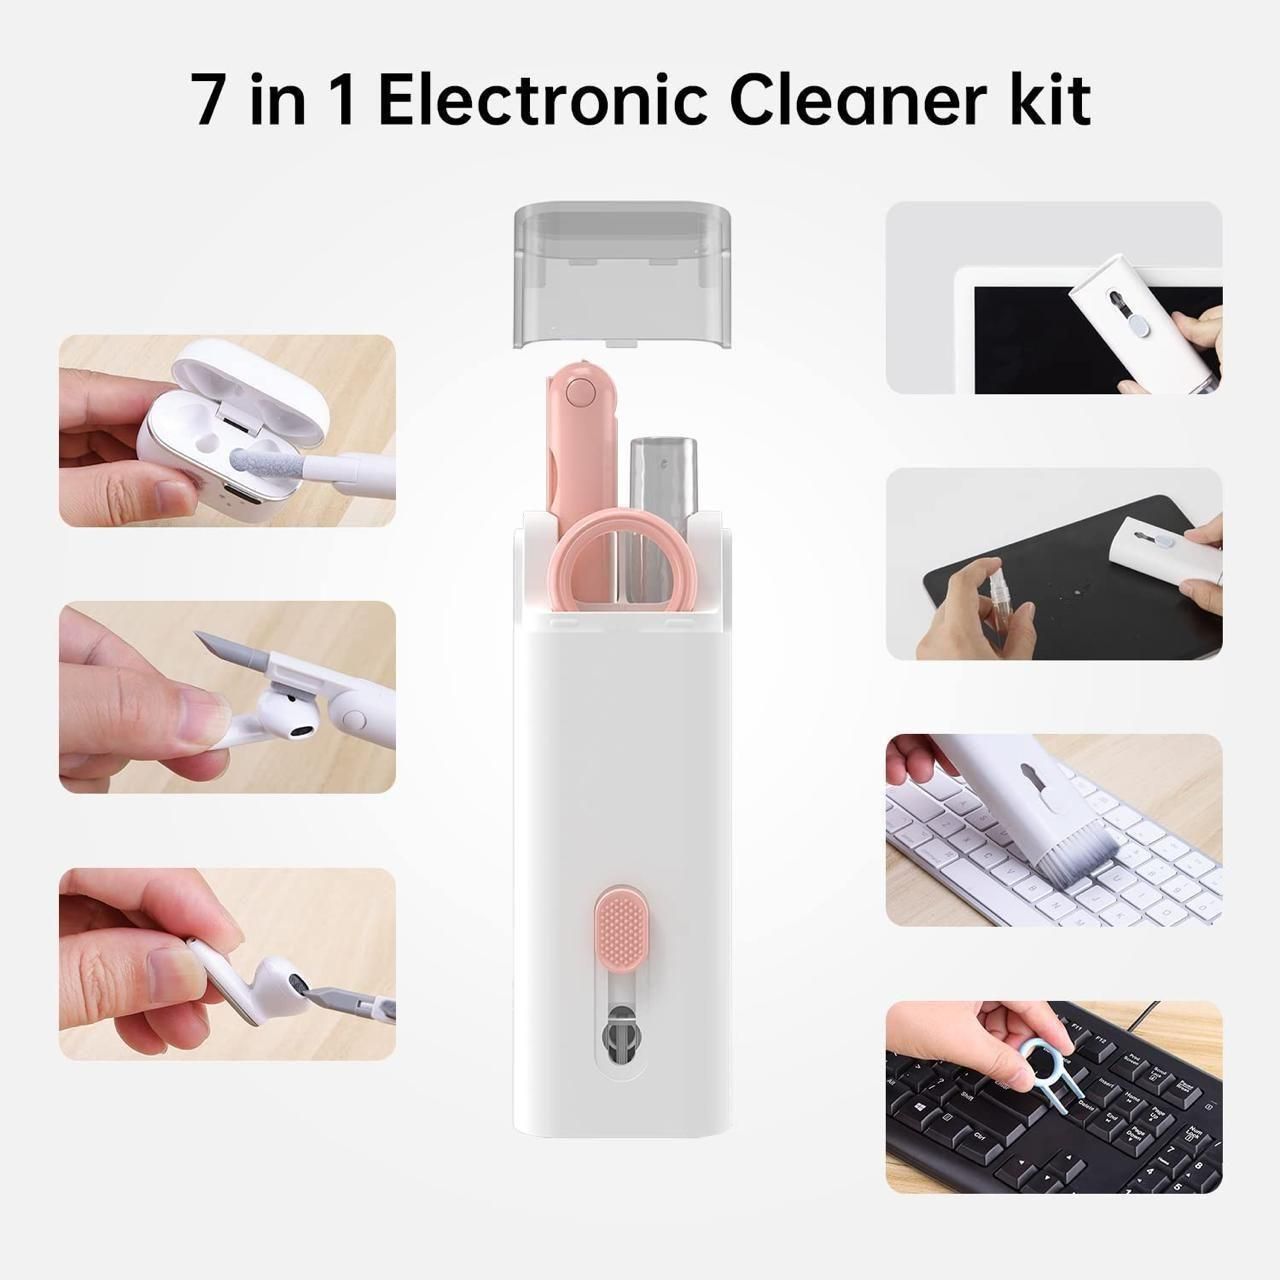 7 in 1 Electronic Cleaner Kit with Brush - Deal IND.